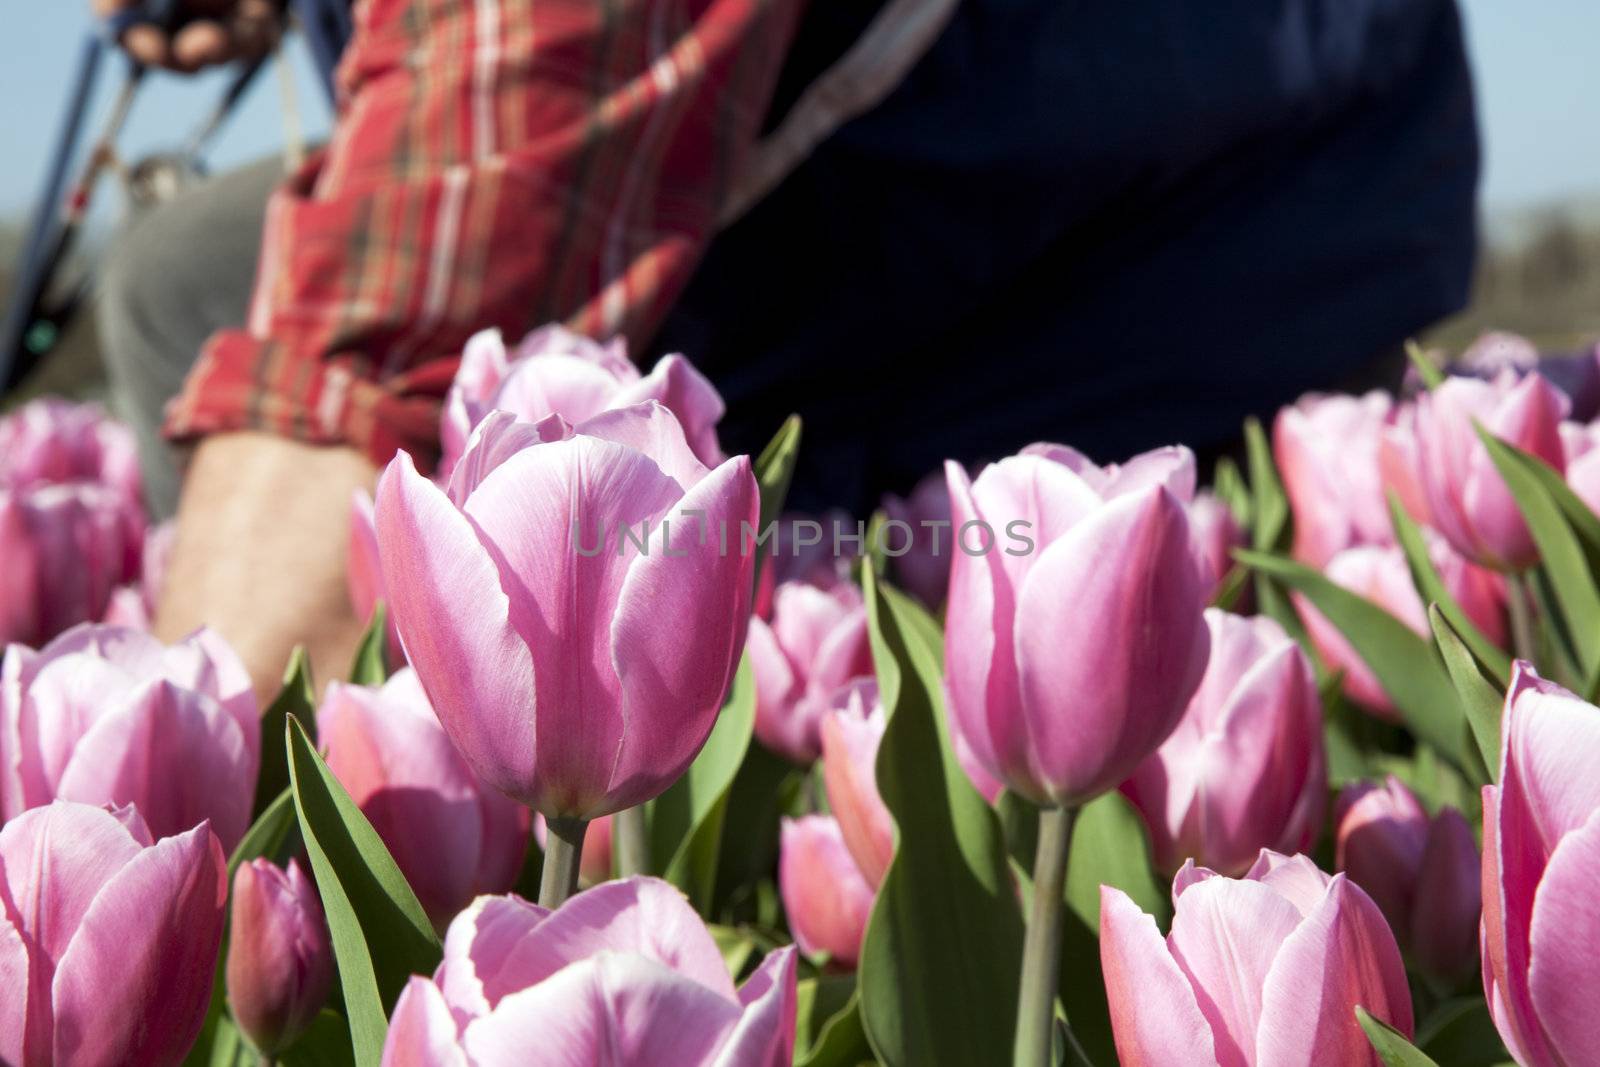 Tulips in Holland with worker weeding in the background